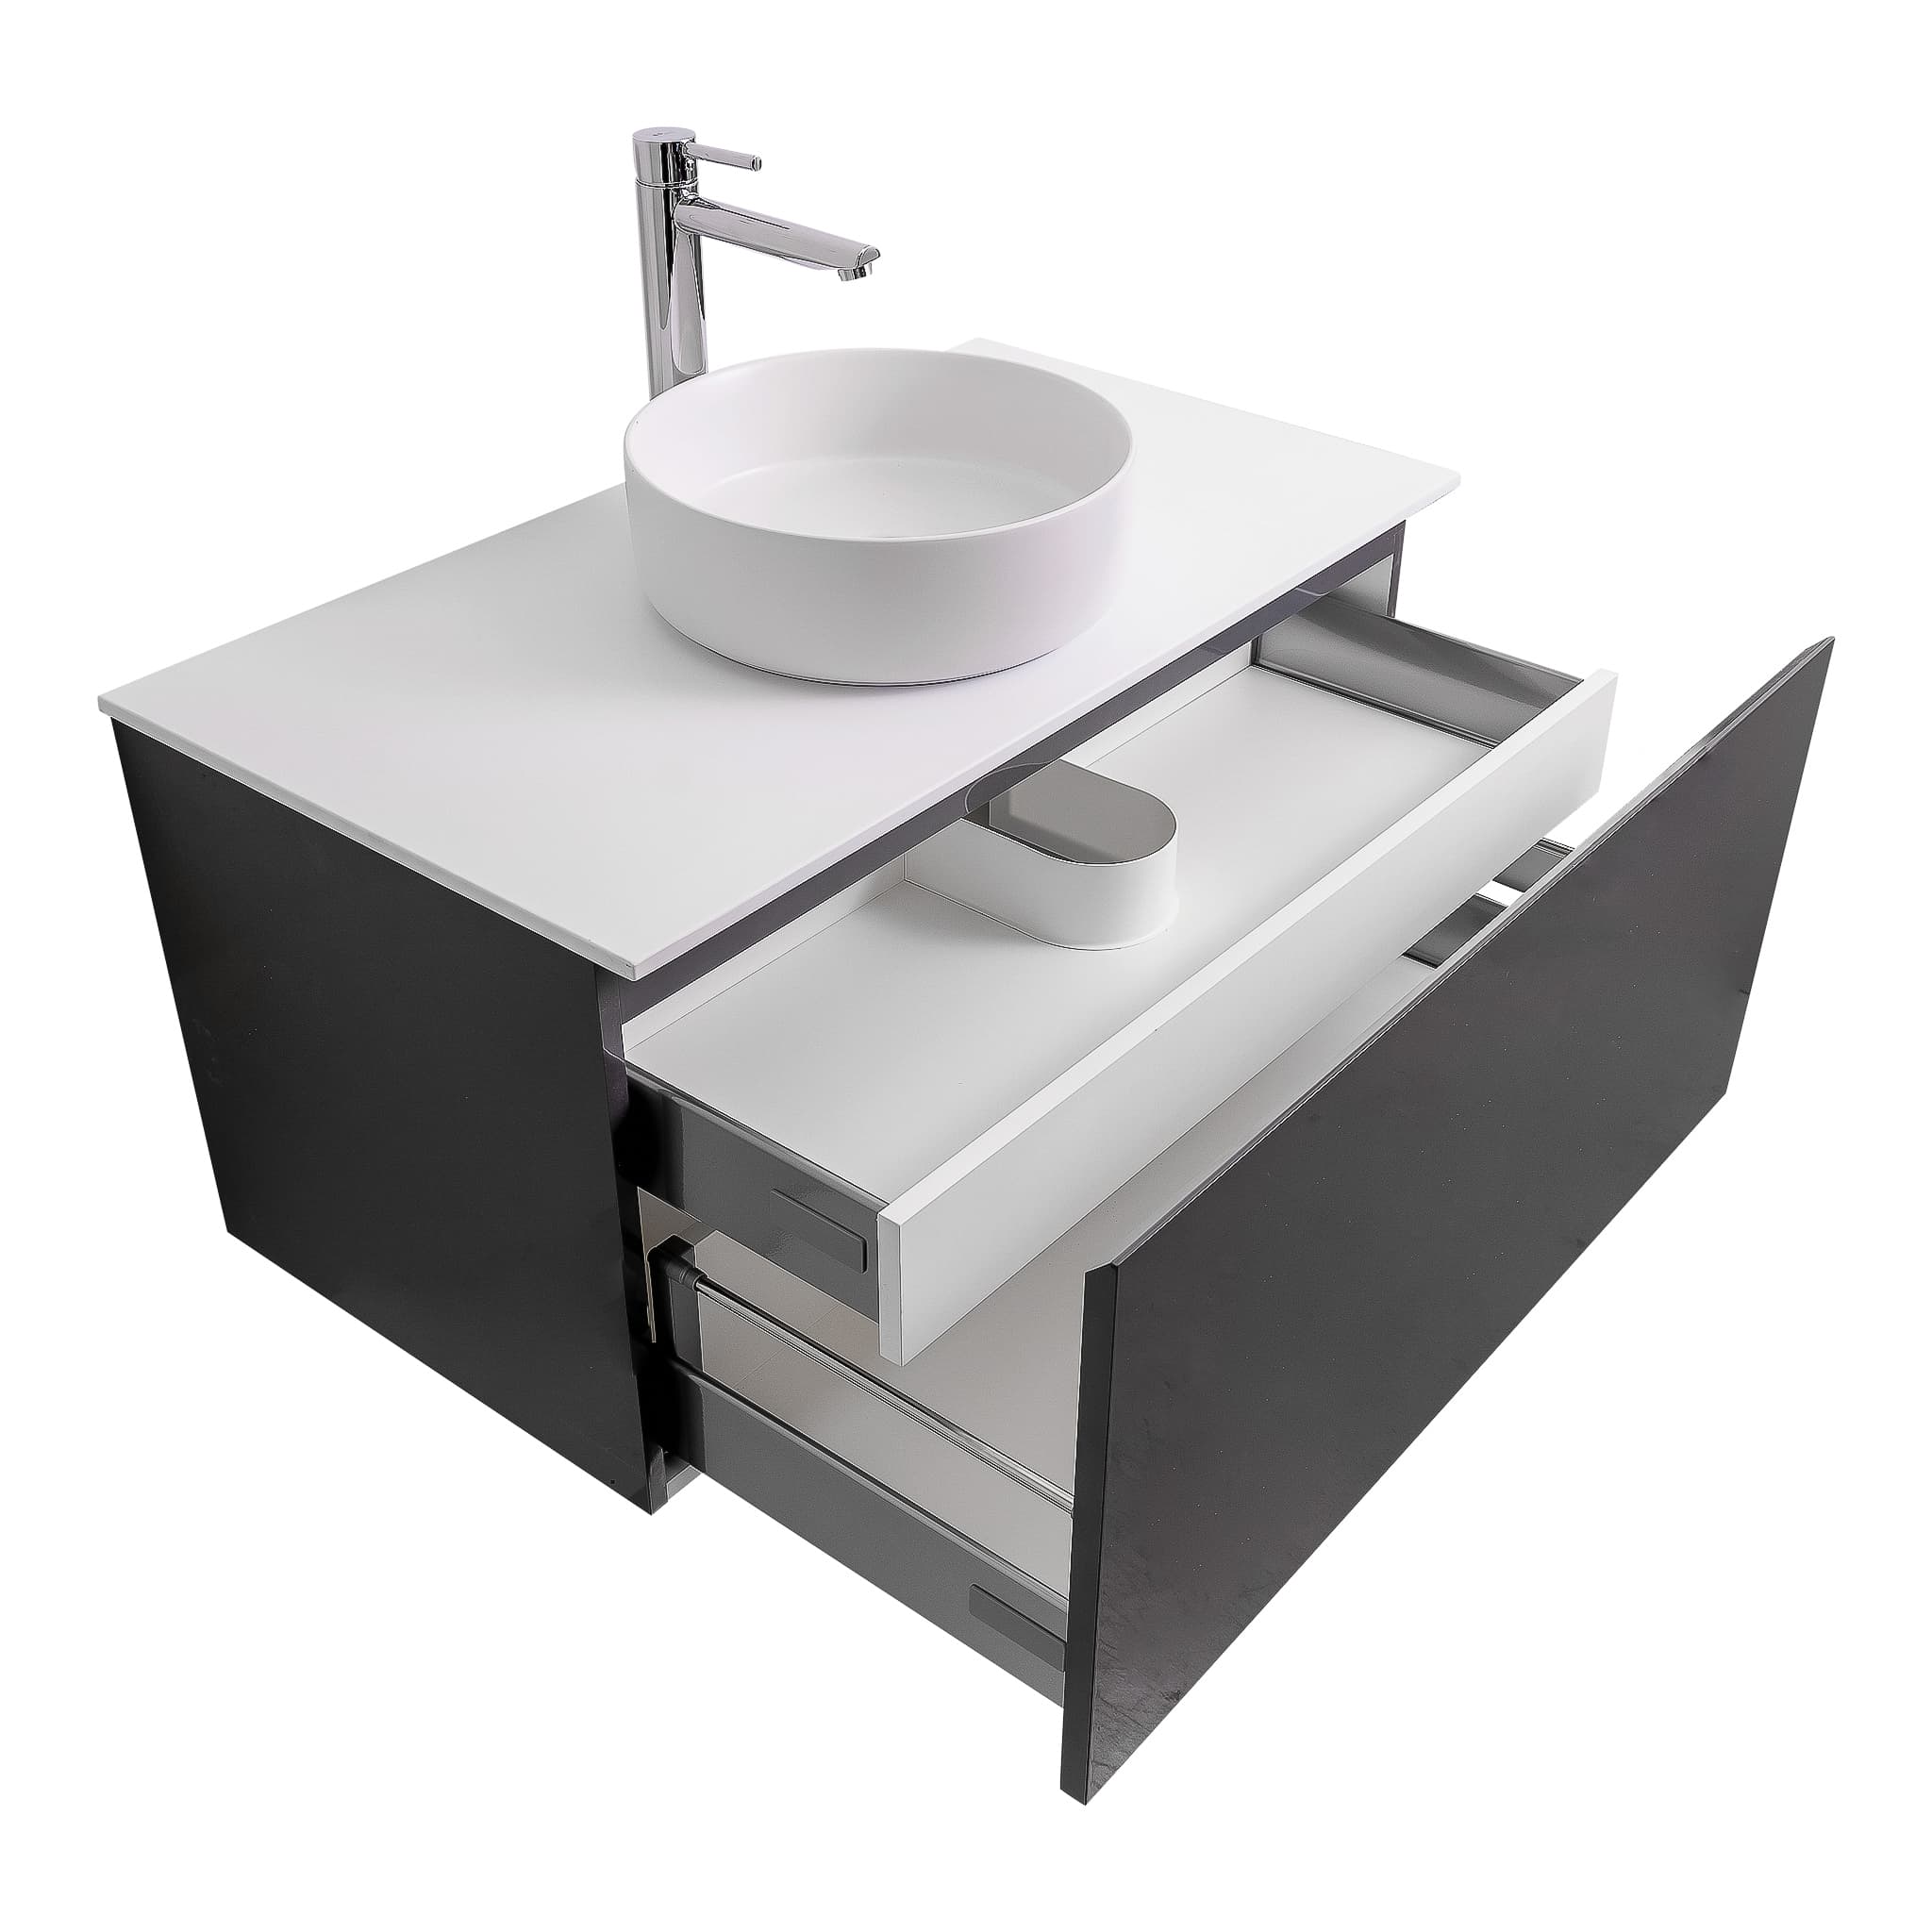 Venice 39.5 Anthracite High Gloss Cabinet, Ares White Top And Ares White Ceramic Basin, Wall Mounted Modern Vanity Set